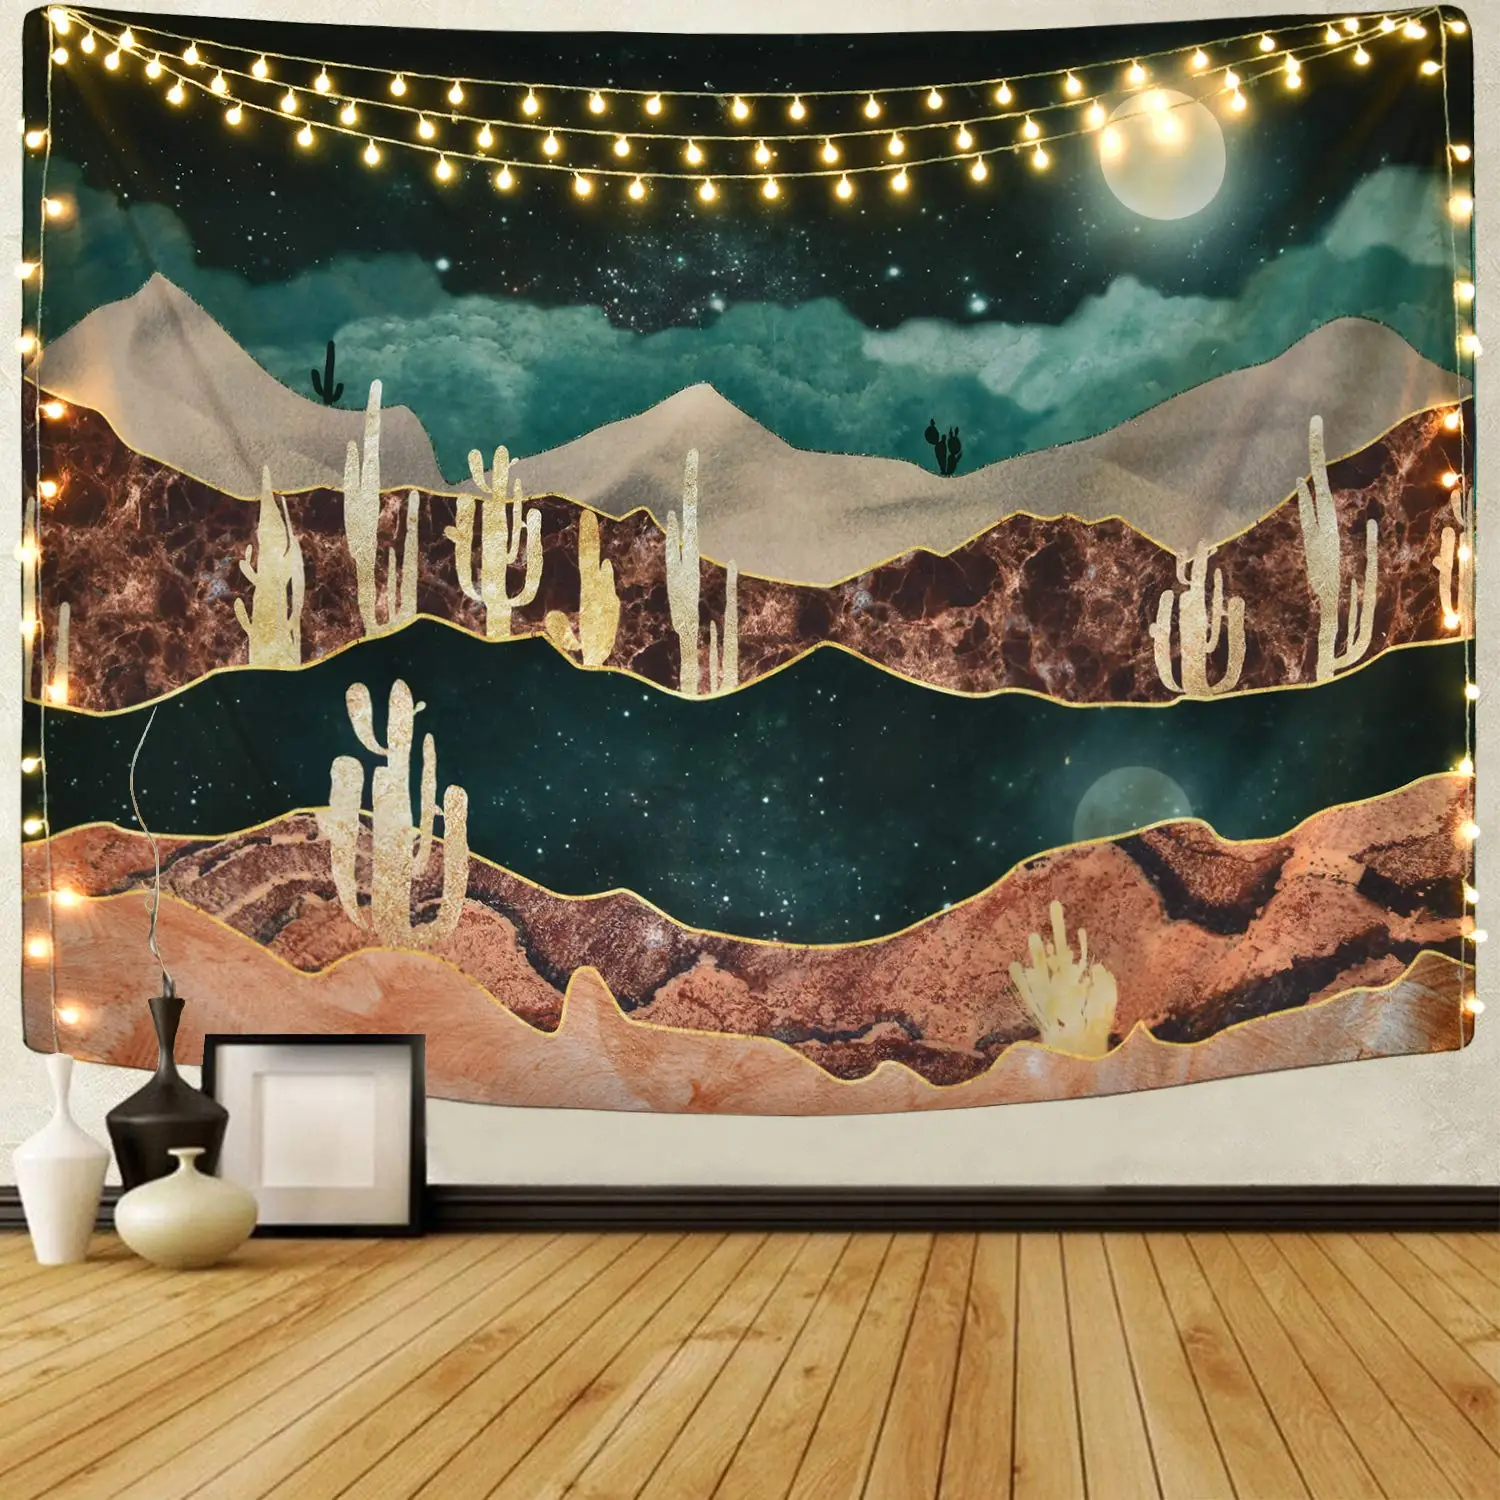 

Mountain Tapestry Moon Tapestry Desert Cactus Tapestry Starry Night Nature Landscape Tapestry Wall Hanging Bedroom Decorations